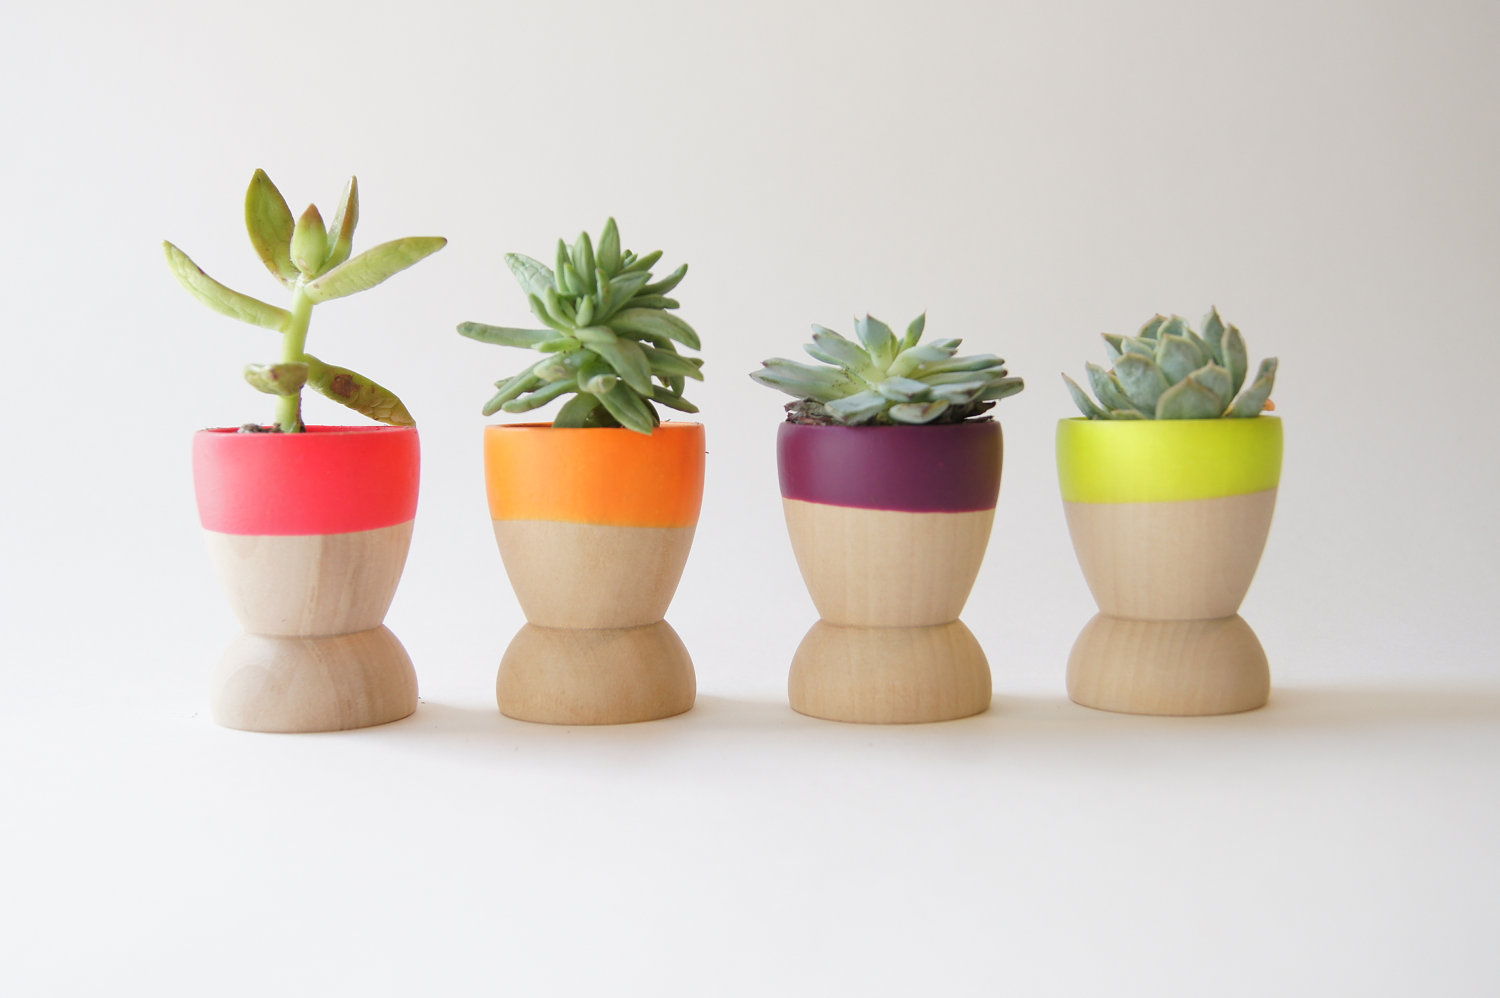 Dipped Mini Wooden Bowls & Planters